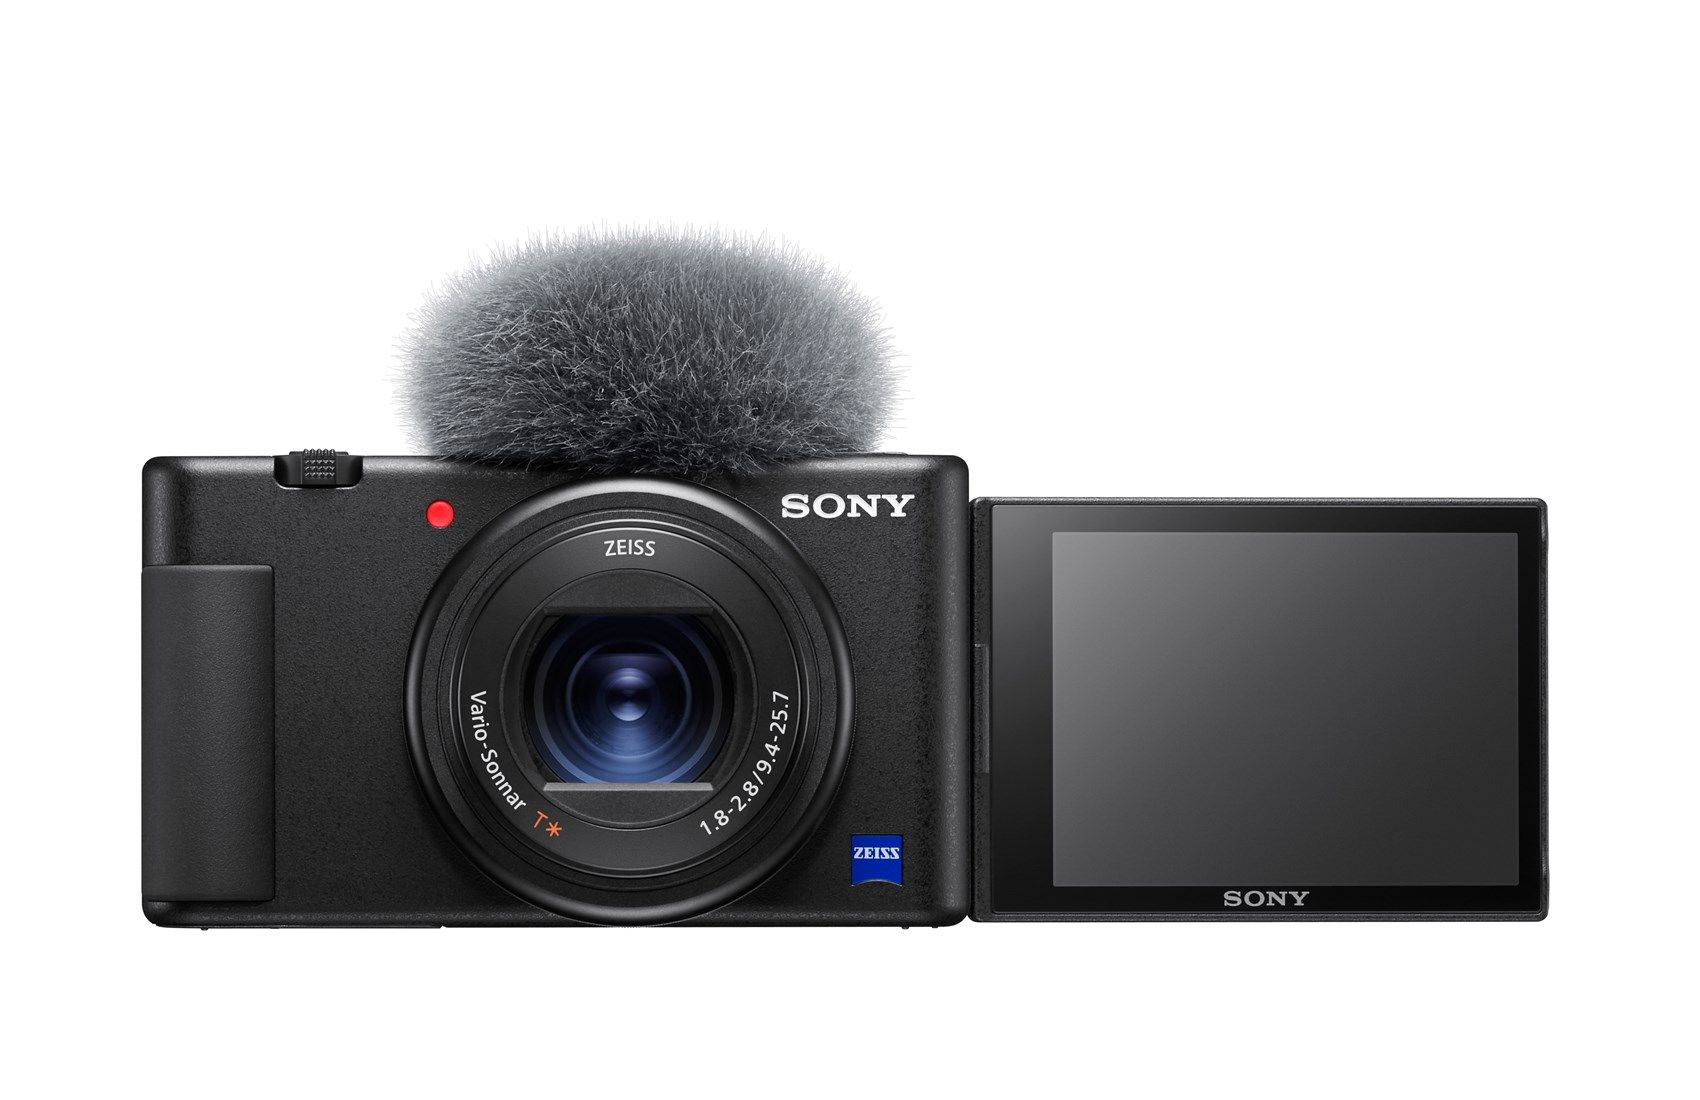 Sony ZV-1 Compact Digital Camera 4K UHD - Black - Perfect for Vloggers - Product Photo 8 - Front view of the camera with the screen extended and microphone wind guard attached